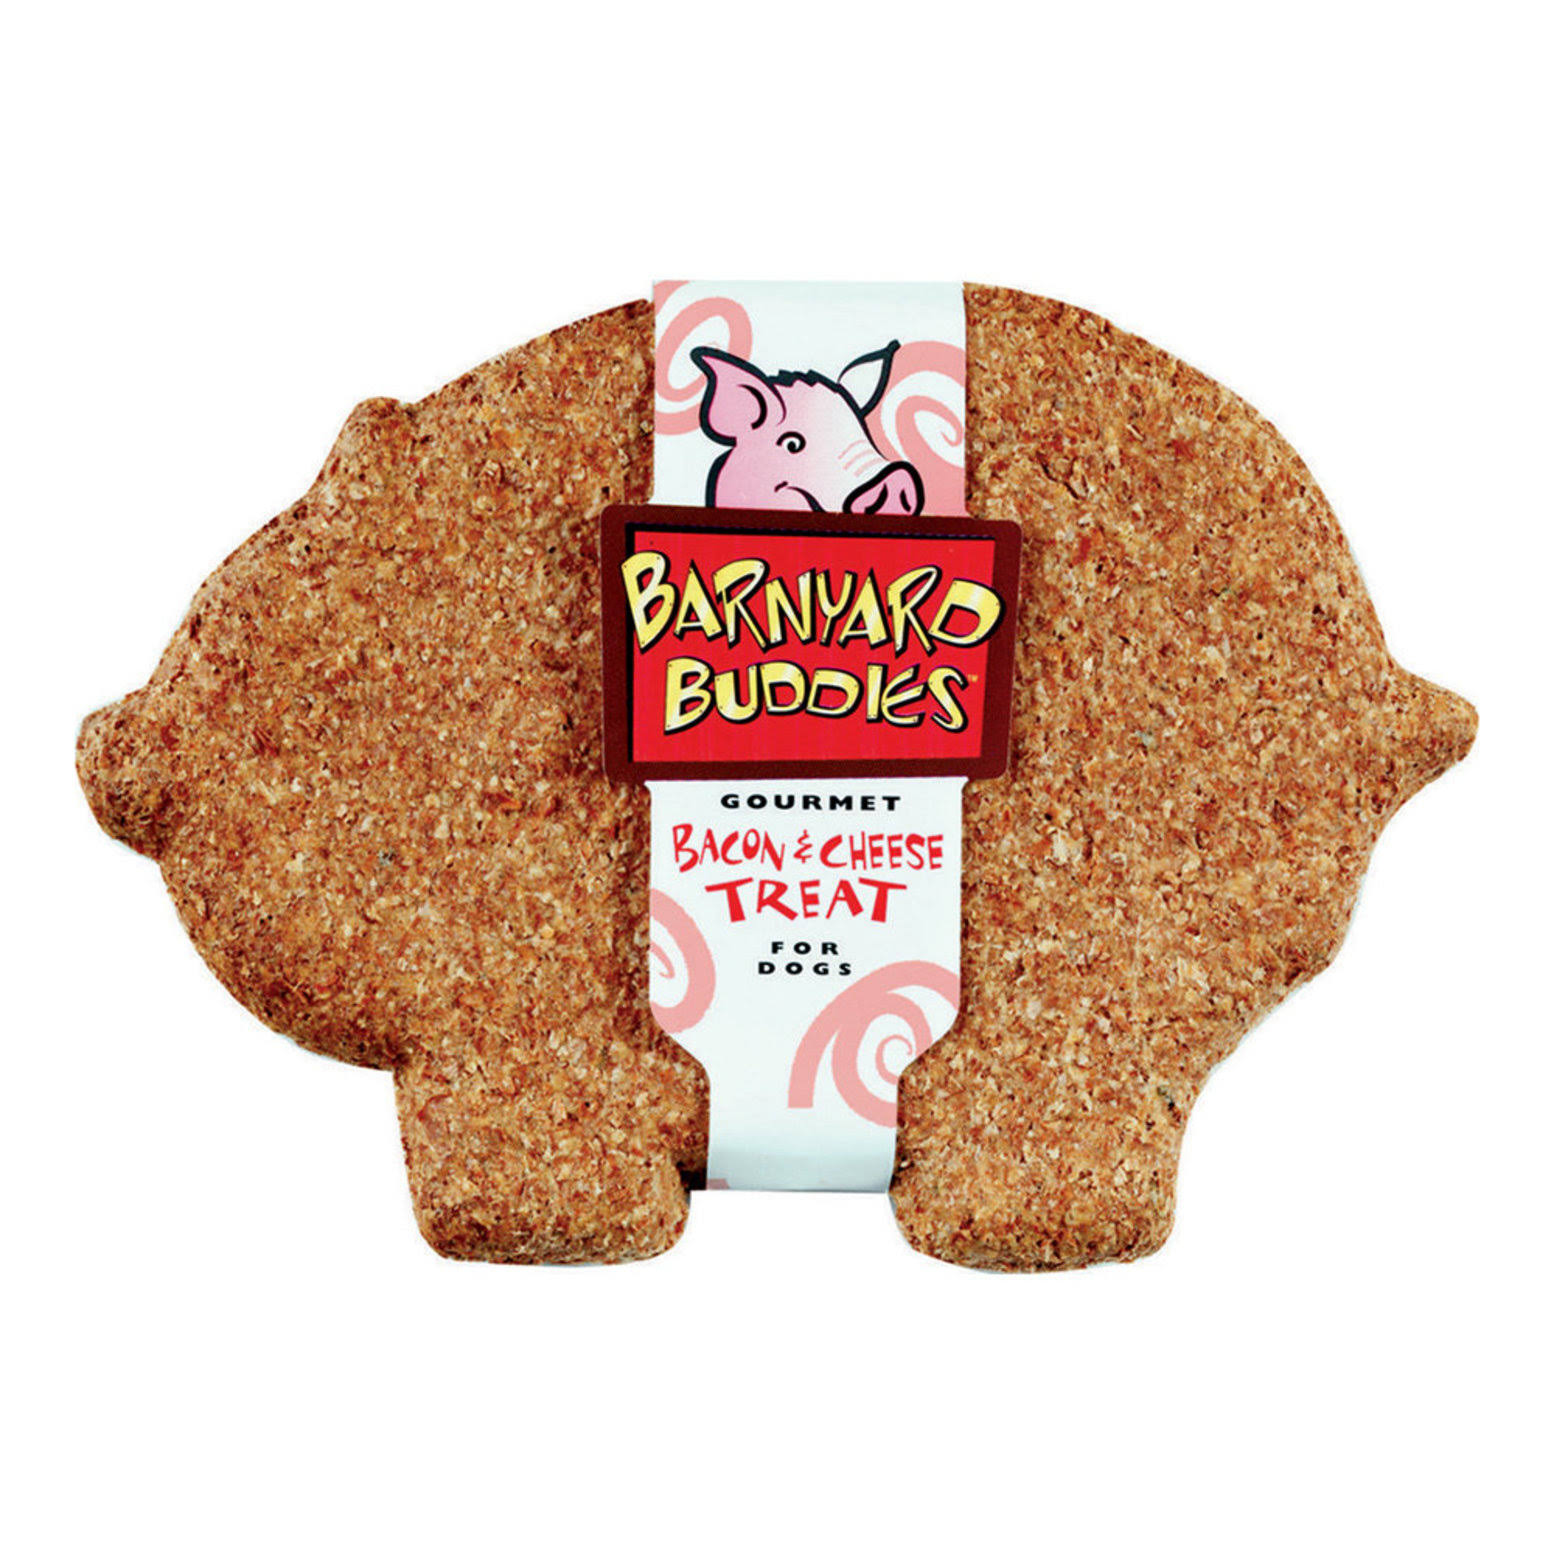 Nature's Animals Dog Treat - Pig Biscuit, Bacon and Cheese, 18pk